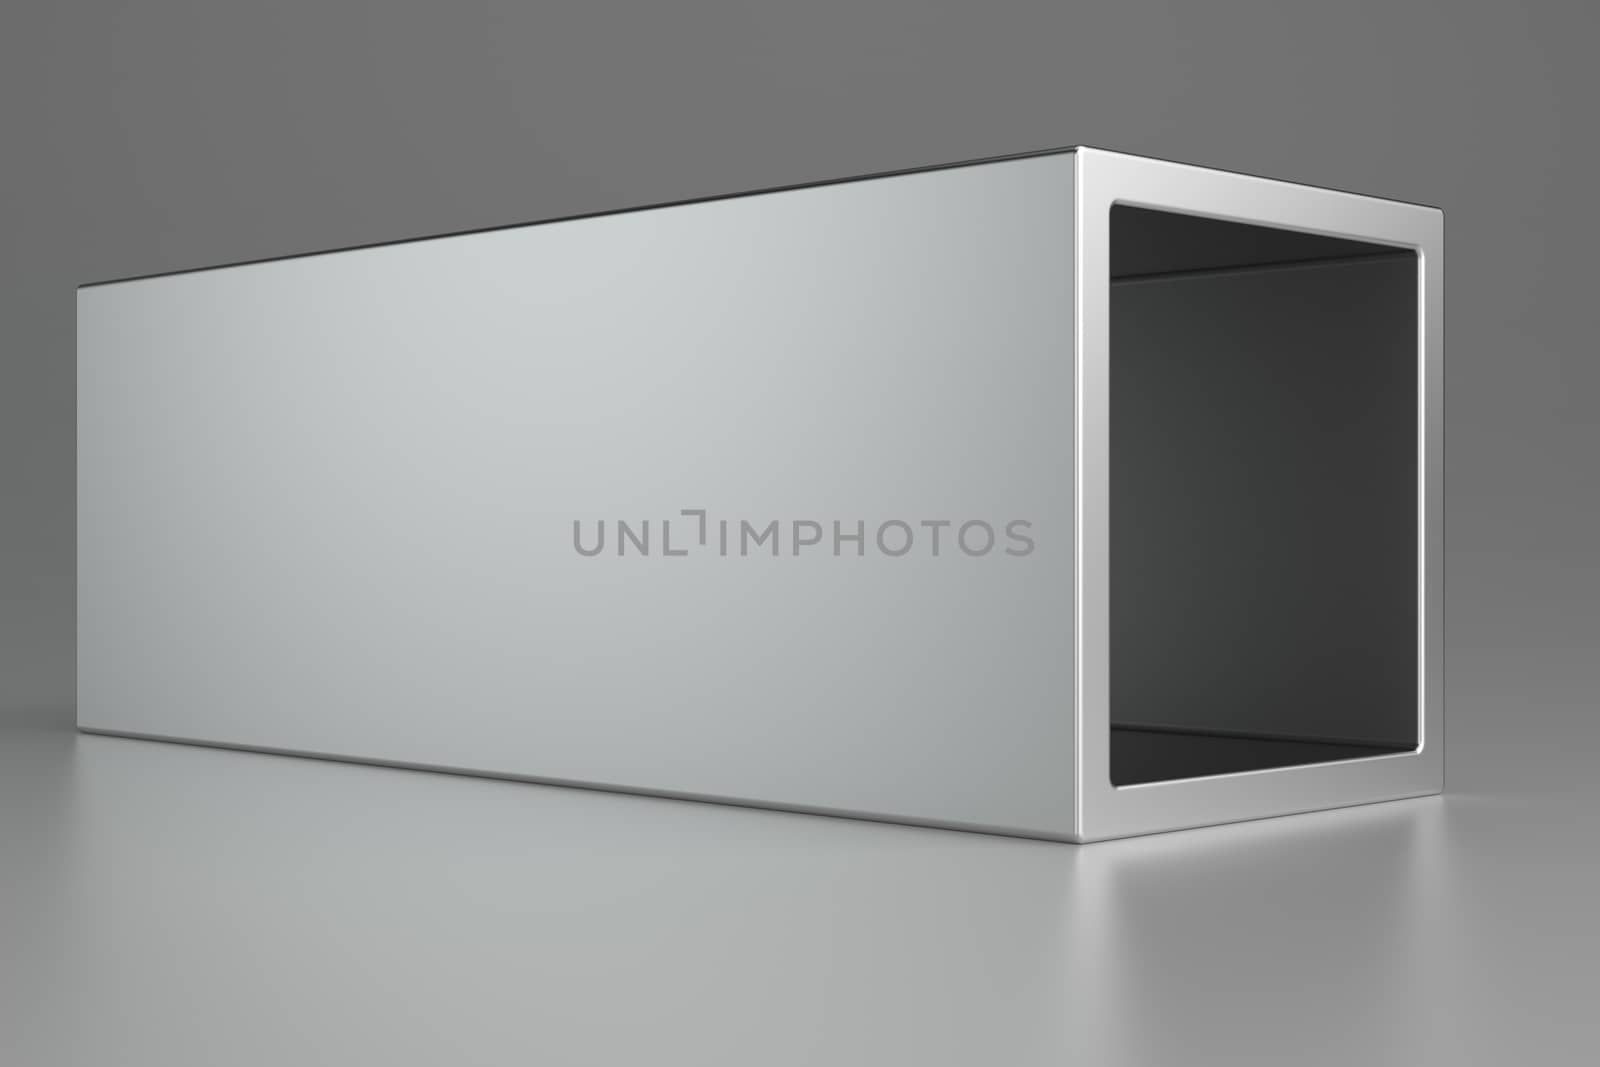 Metal products on gray background. 3d rendering.